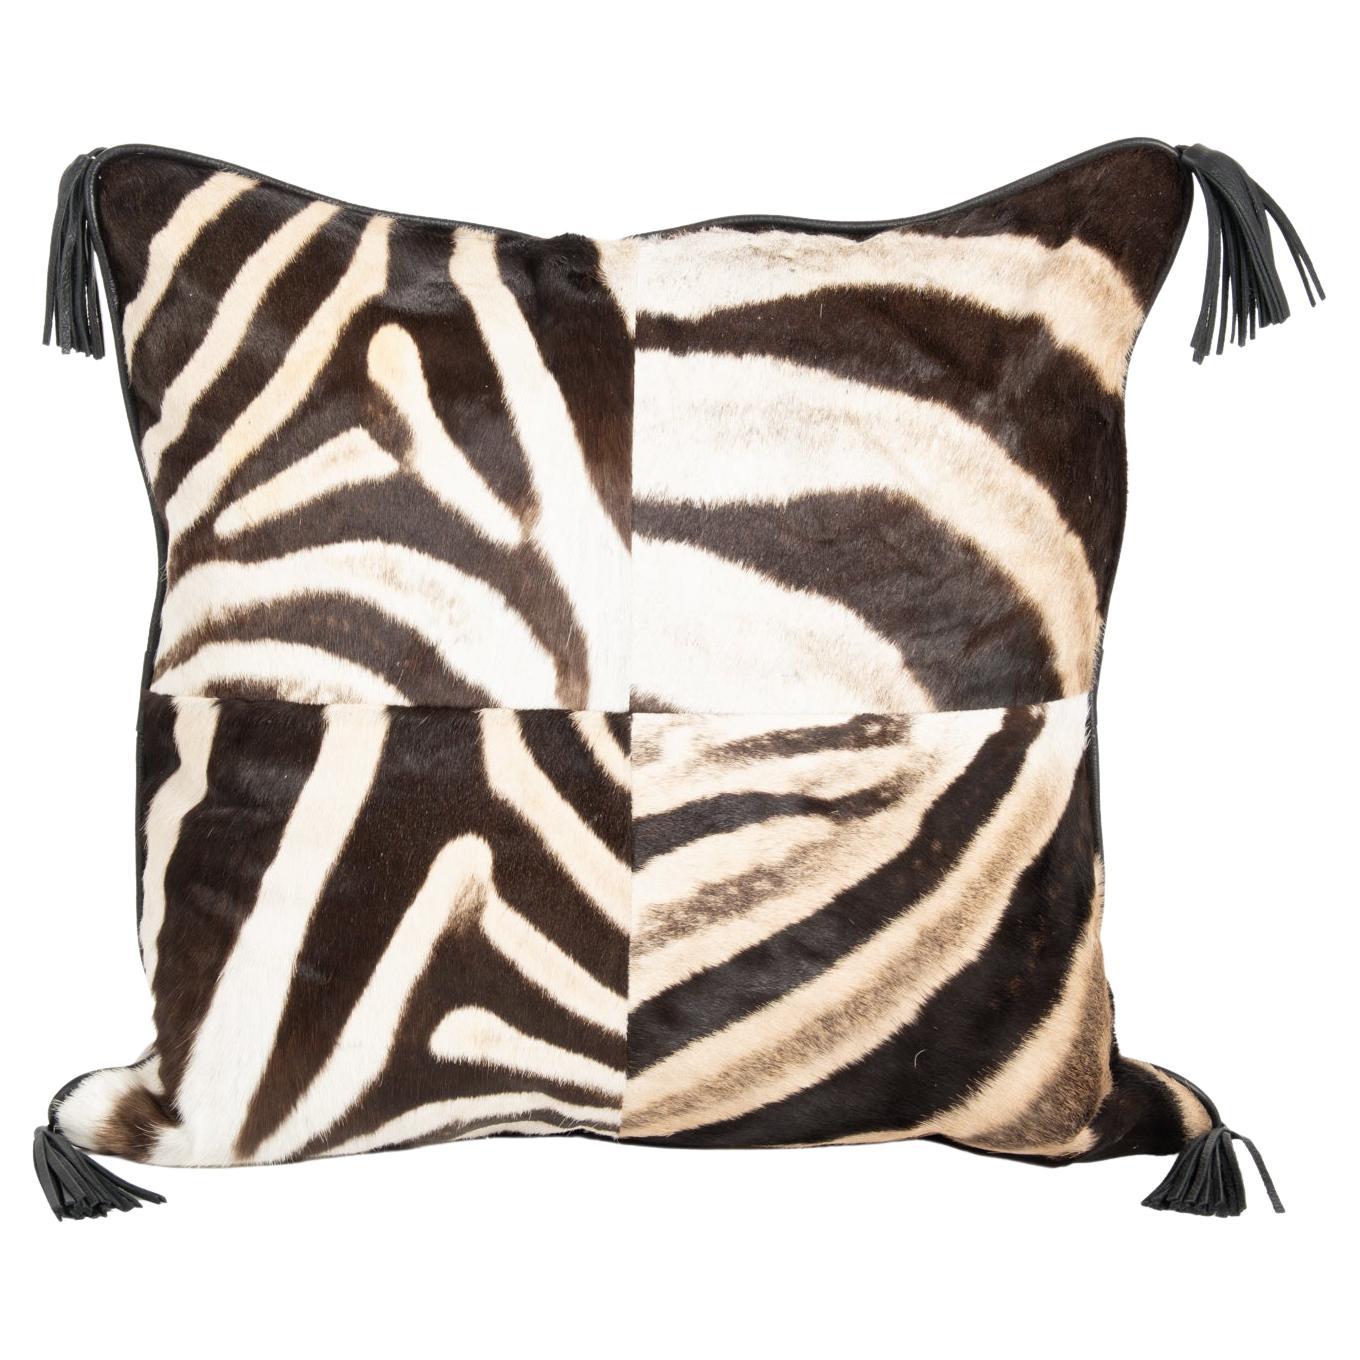 Pillow-Zebra Hide Quarter Panel with Leather Trim For Sale